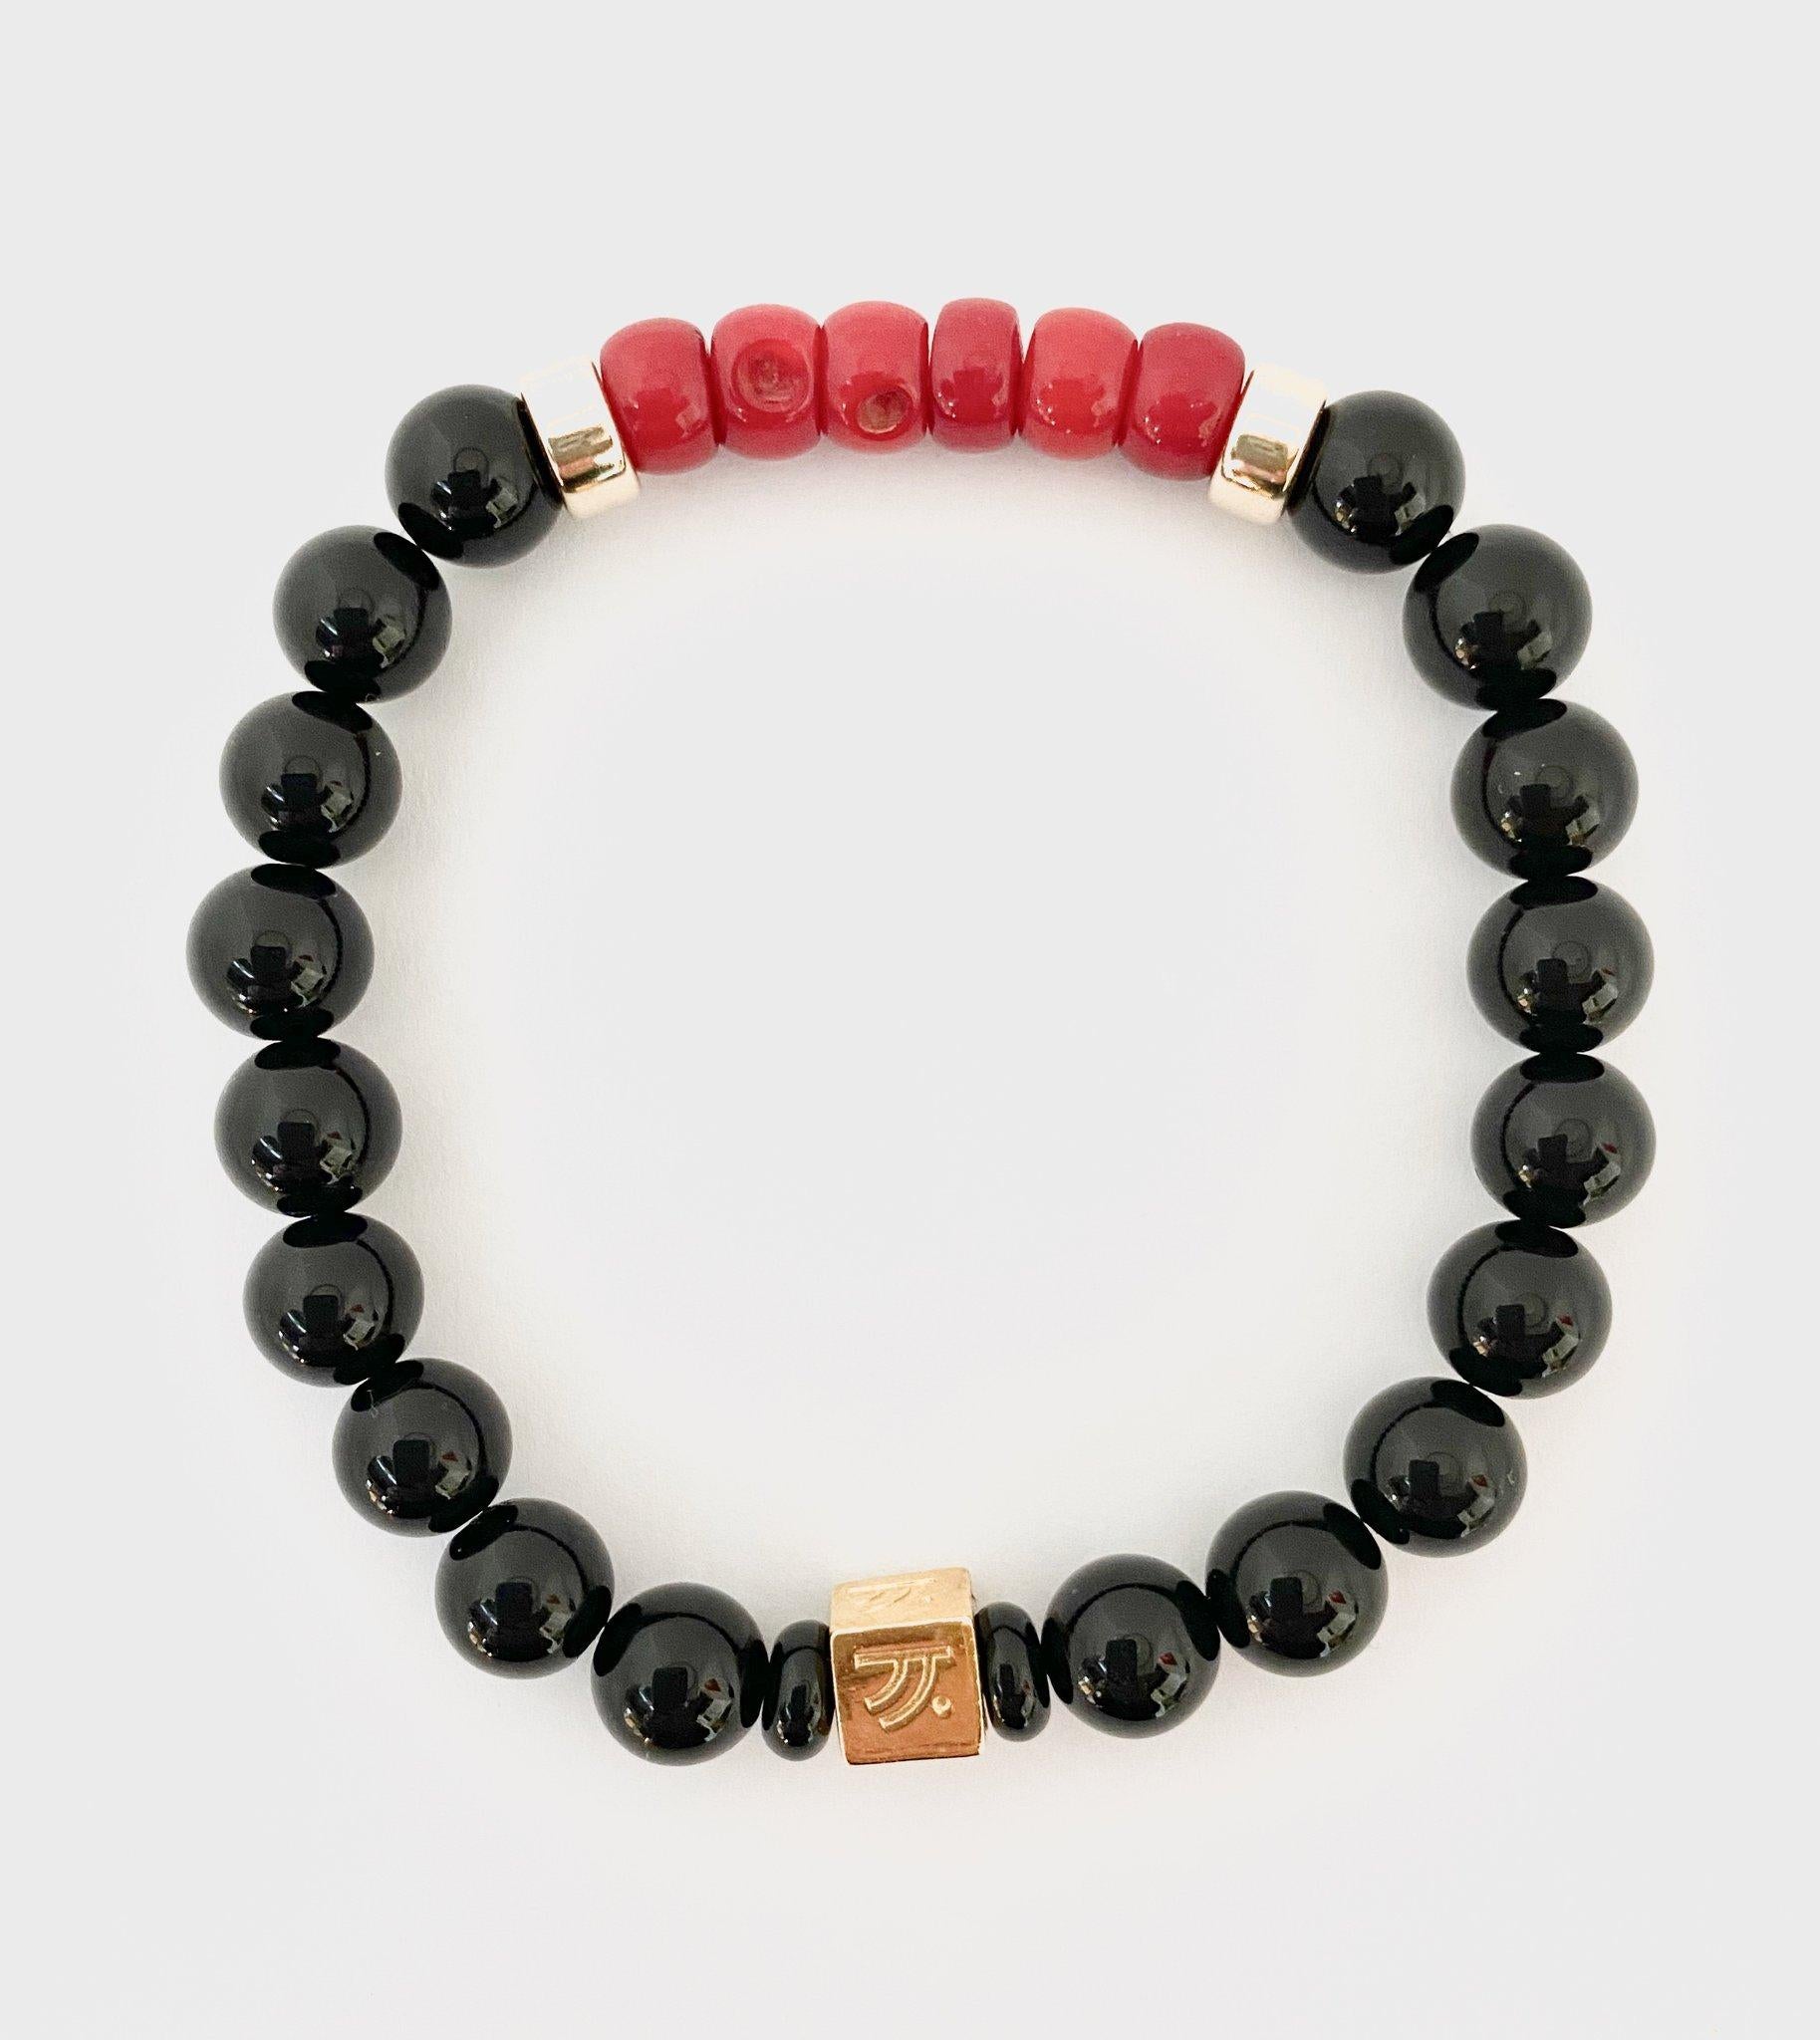 red and black beads meaning